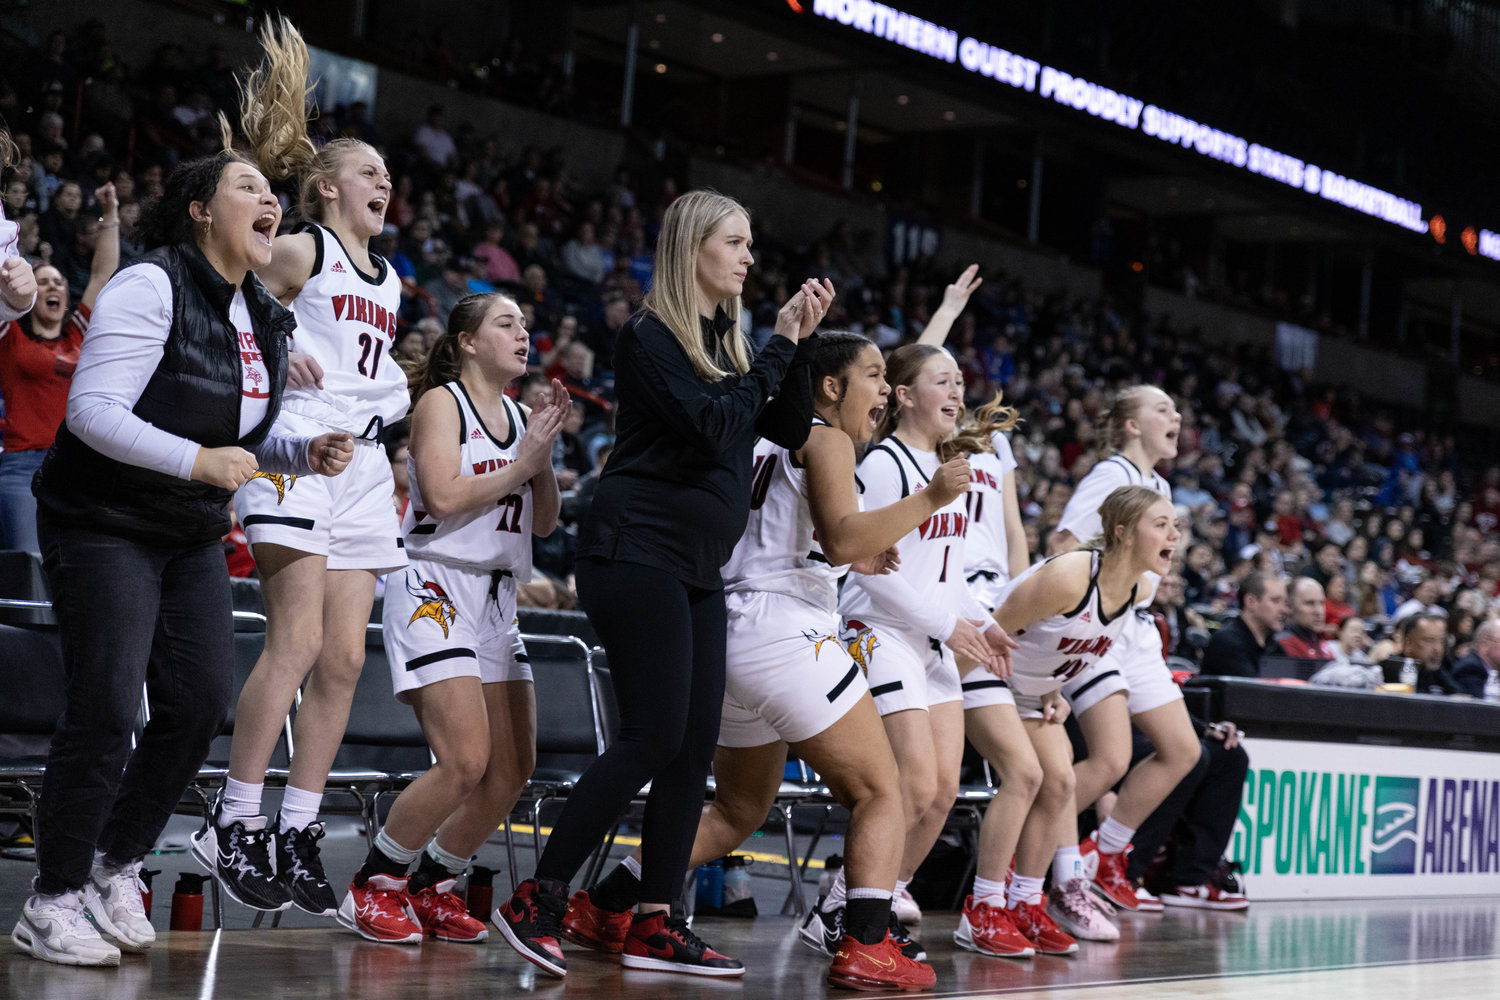 The Mossyrock girls basketball bench celebrates a 3-pointer against Neah Bay in the 1B state championship at Spokane Arena March 4.